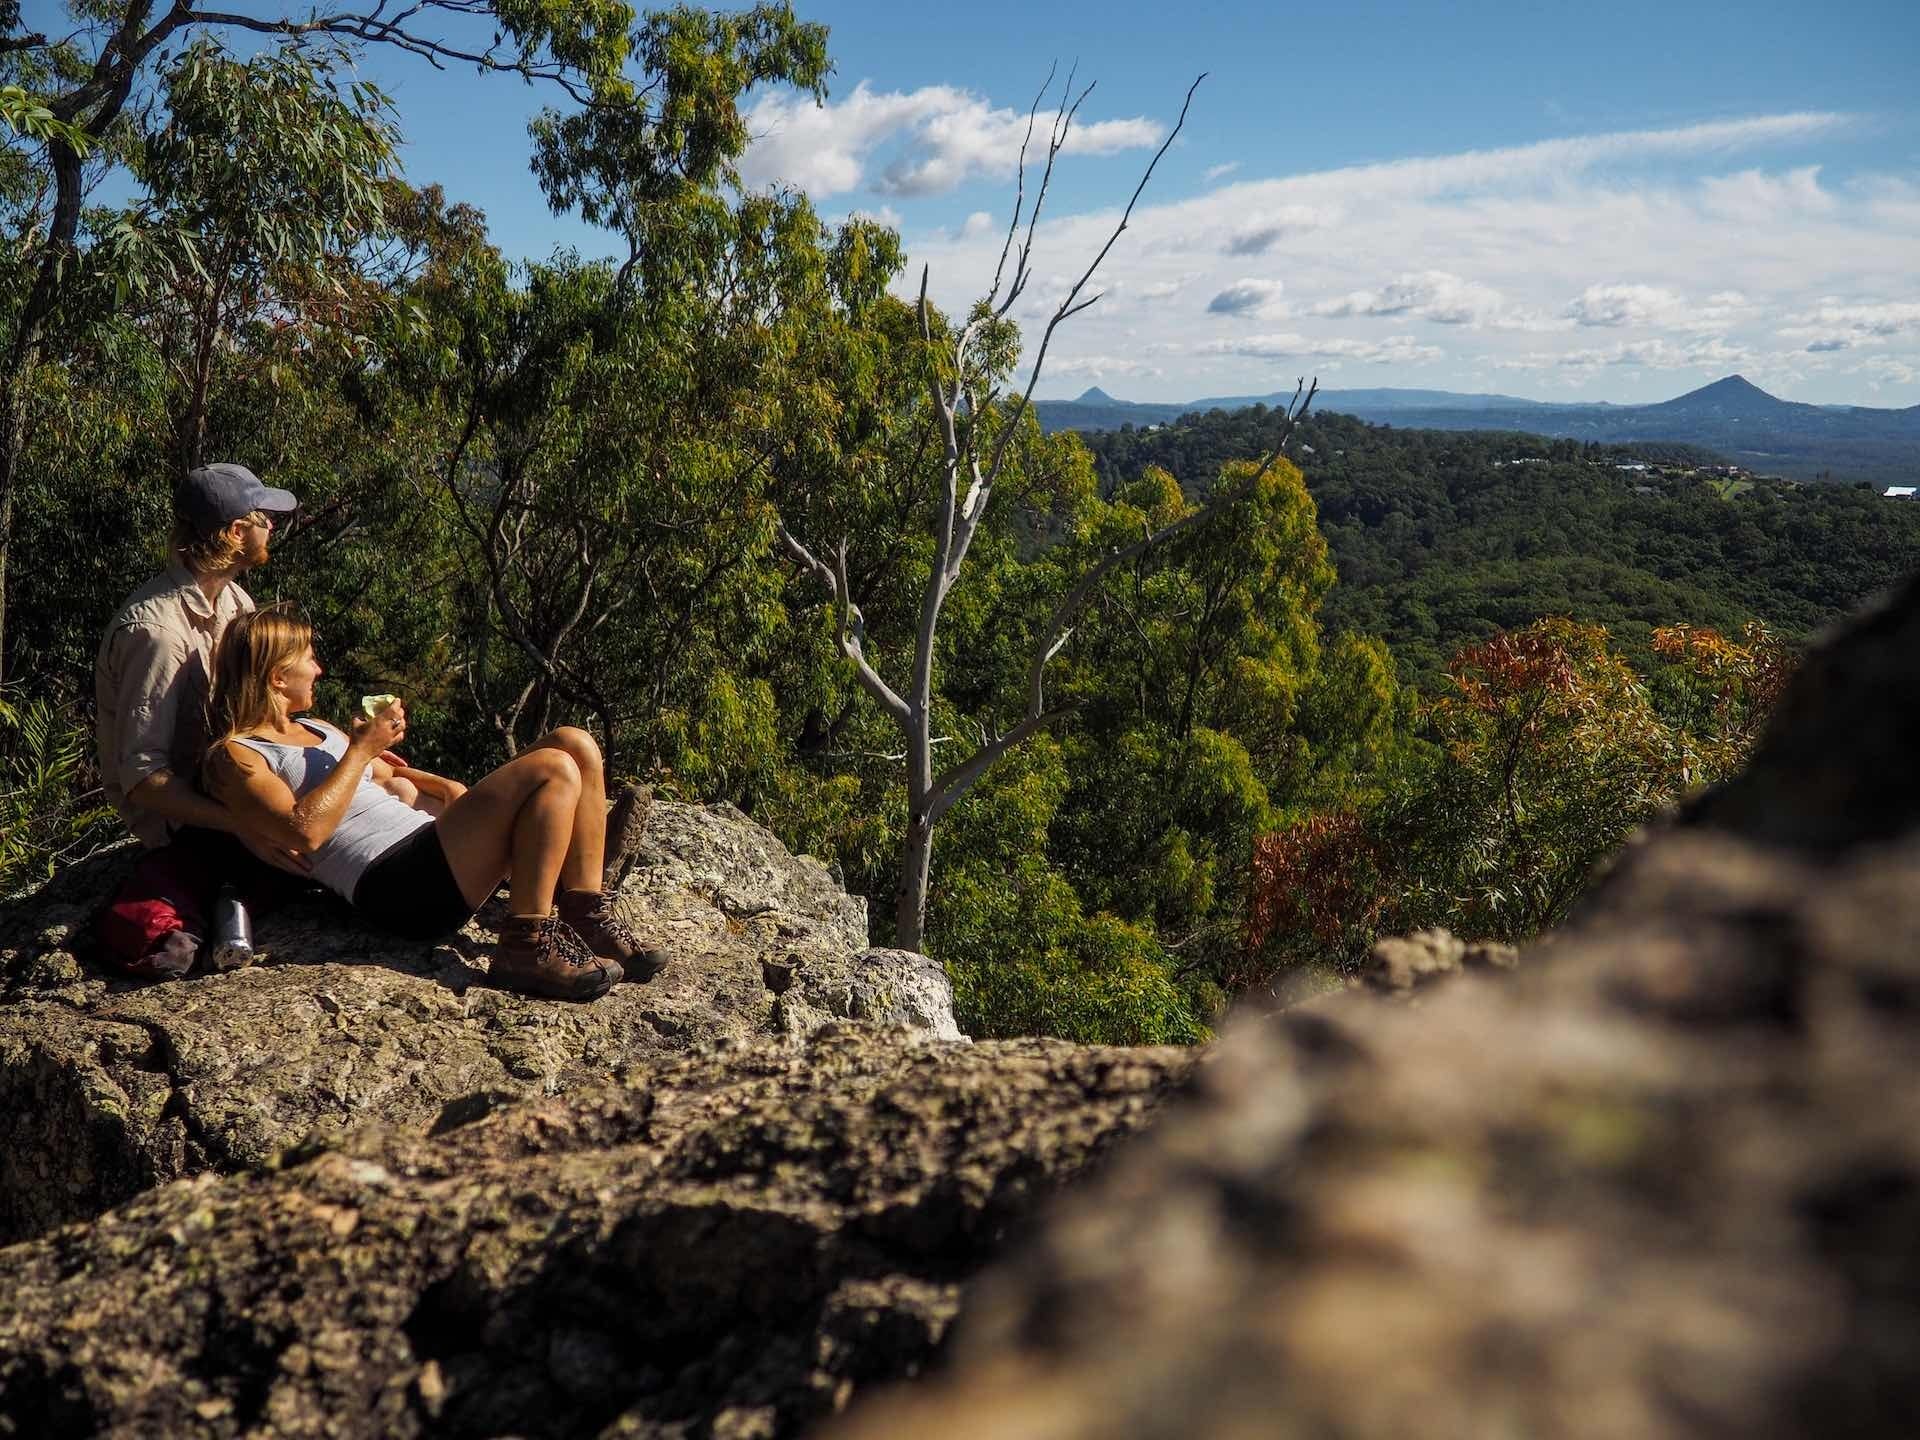 Sun, Surf, & Summits on This South East Queensland Road Trip, Ruby Woodruff, JUCY, Mt Ninderry, Glasshouse Mountains, couple, hike